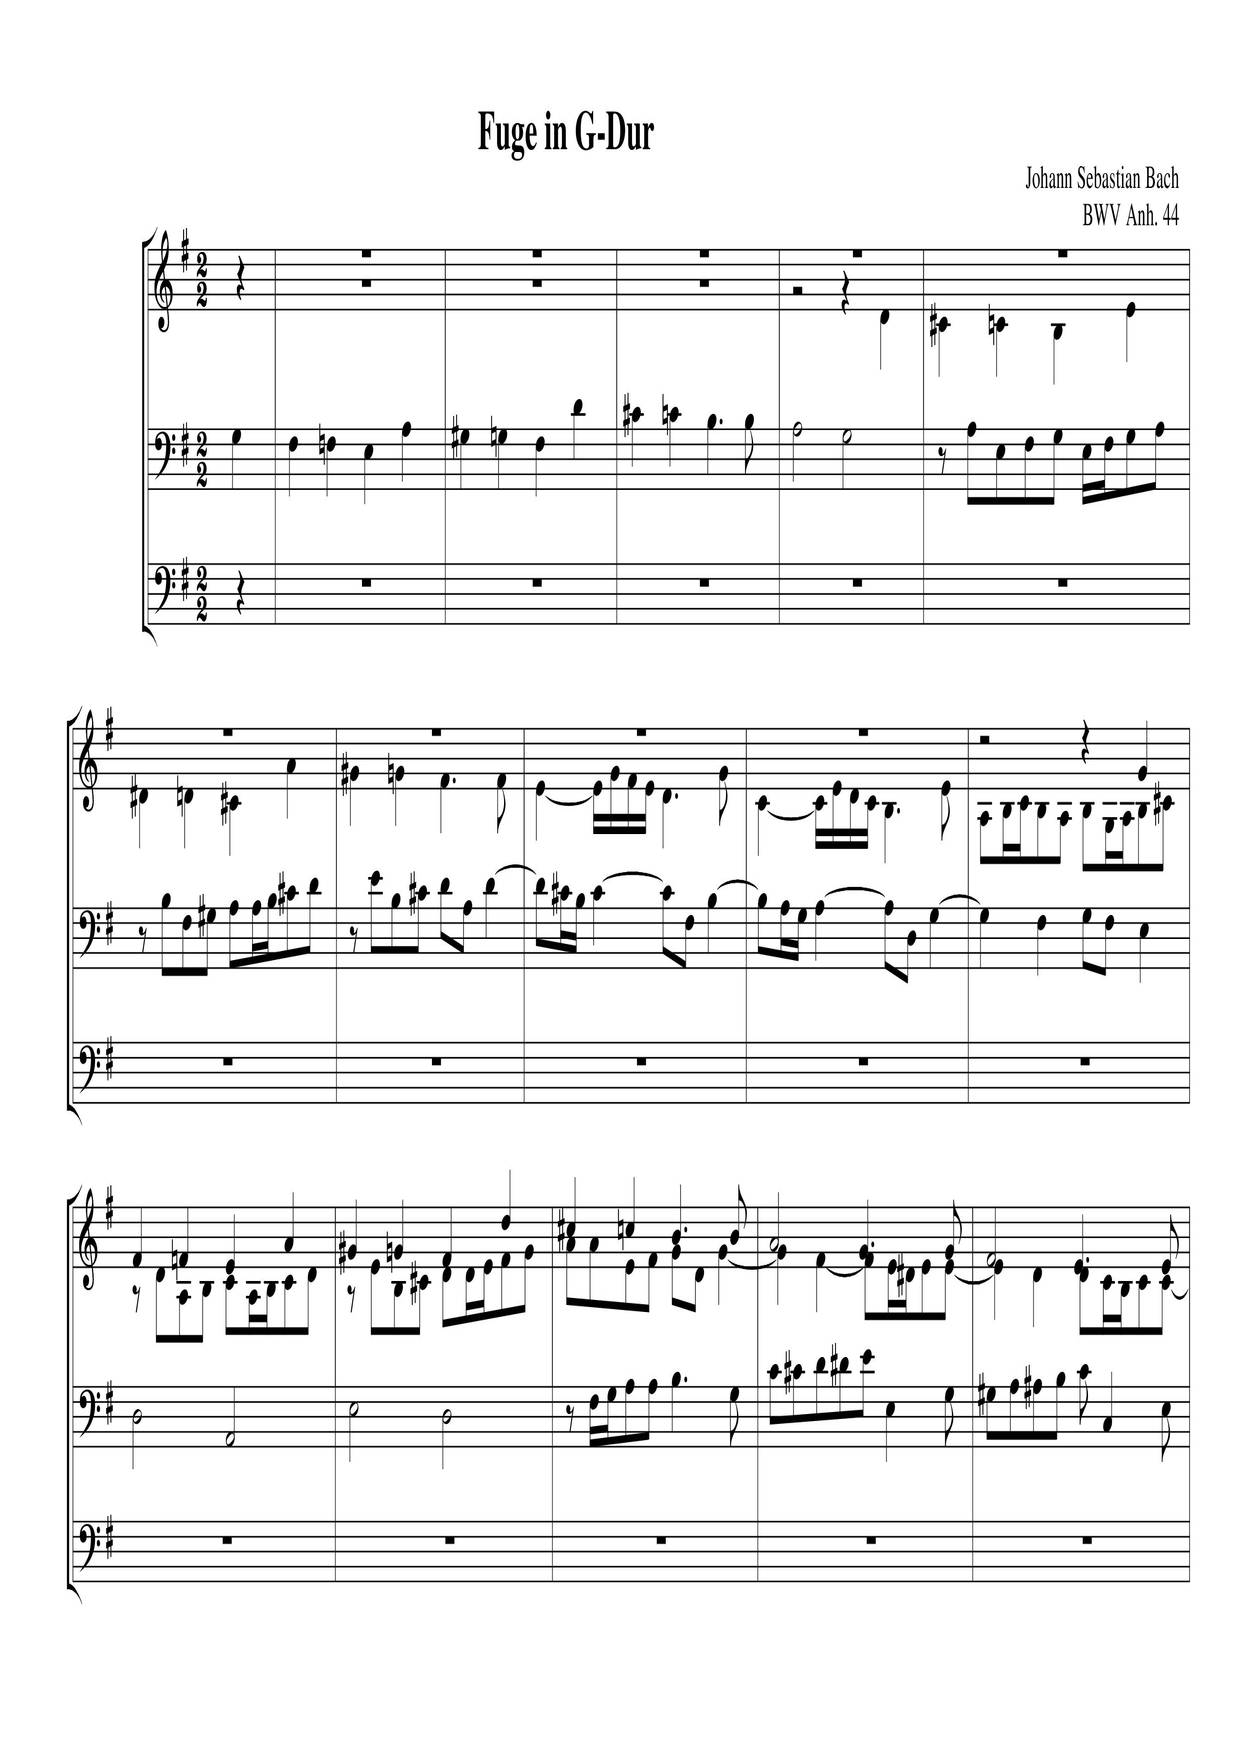 Fugue In G Major, BWV Anh. 44 Score